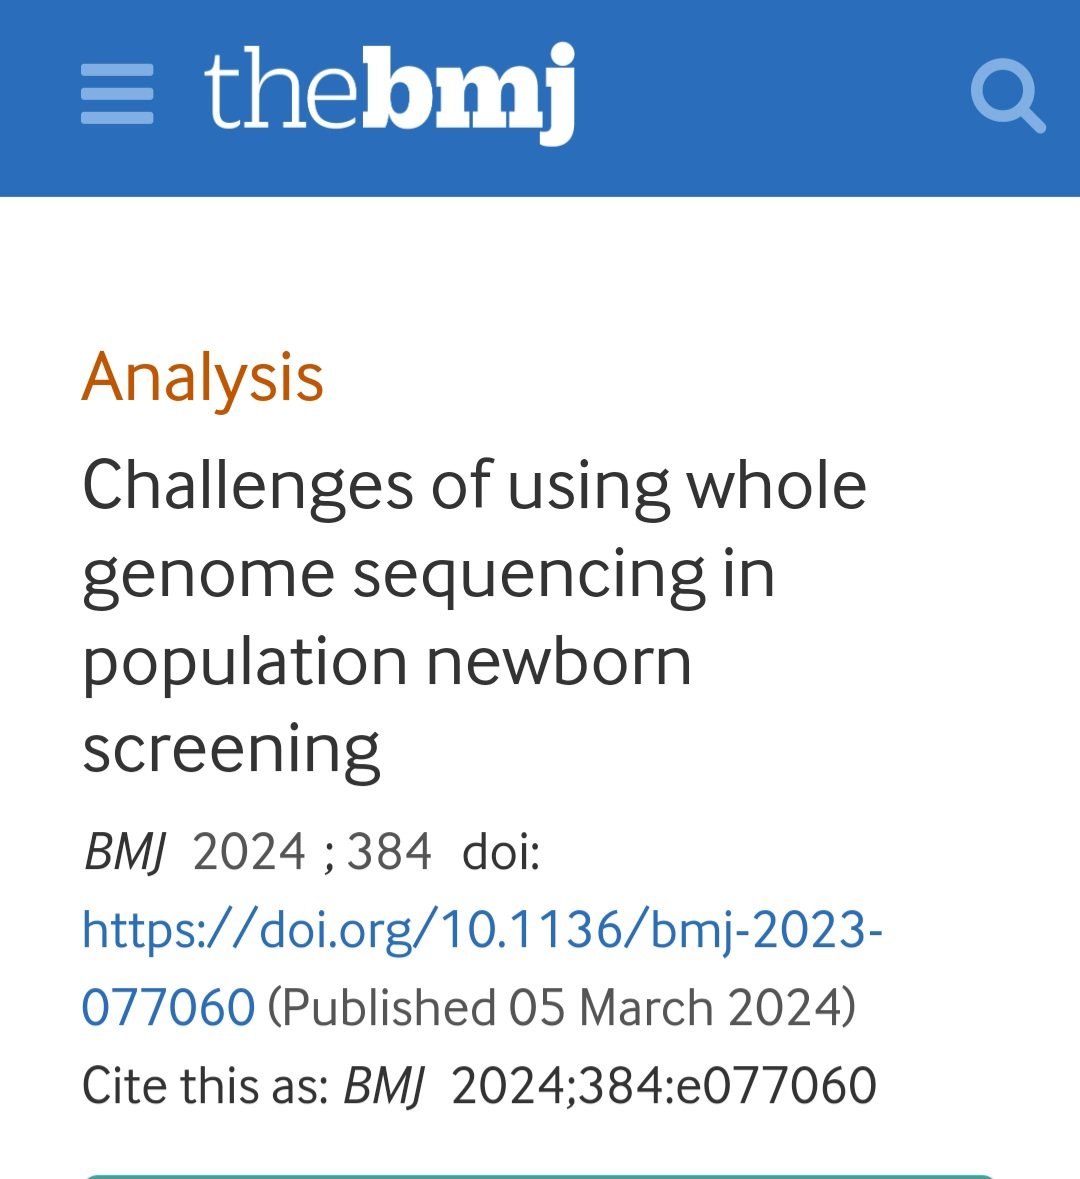 Multiple challenges, the limitations of the technology & the consent. Informed? & it's not the child who is consenting...to their genome being sequenced.